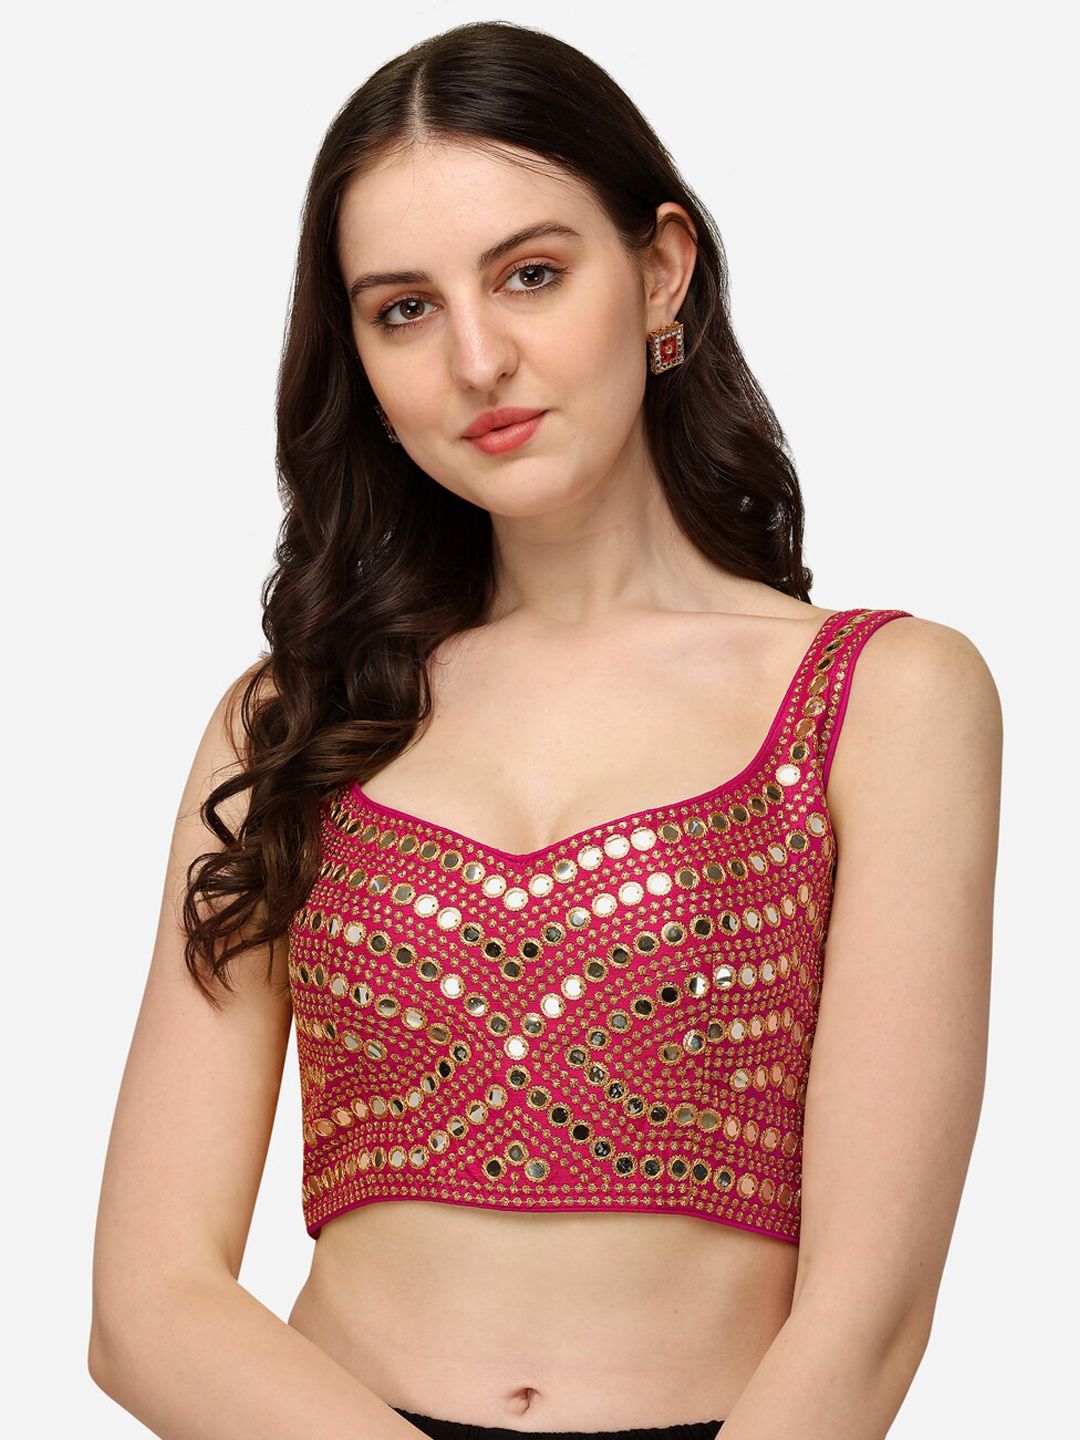 Fab Dadu Pink Embroidered Saree Blouse Price in India